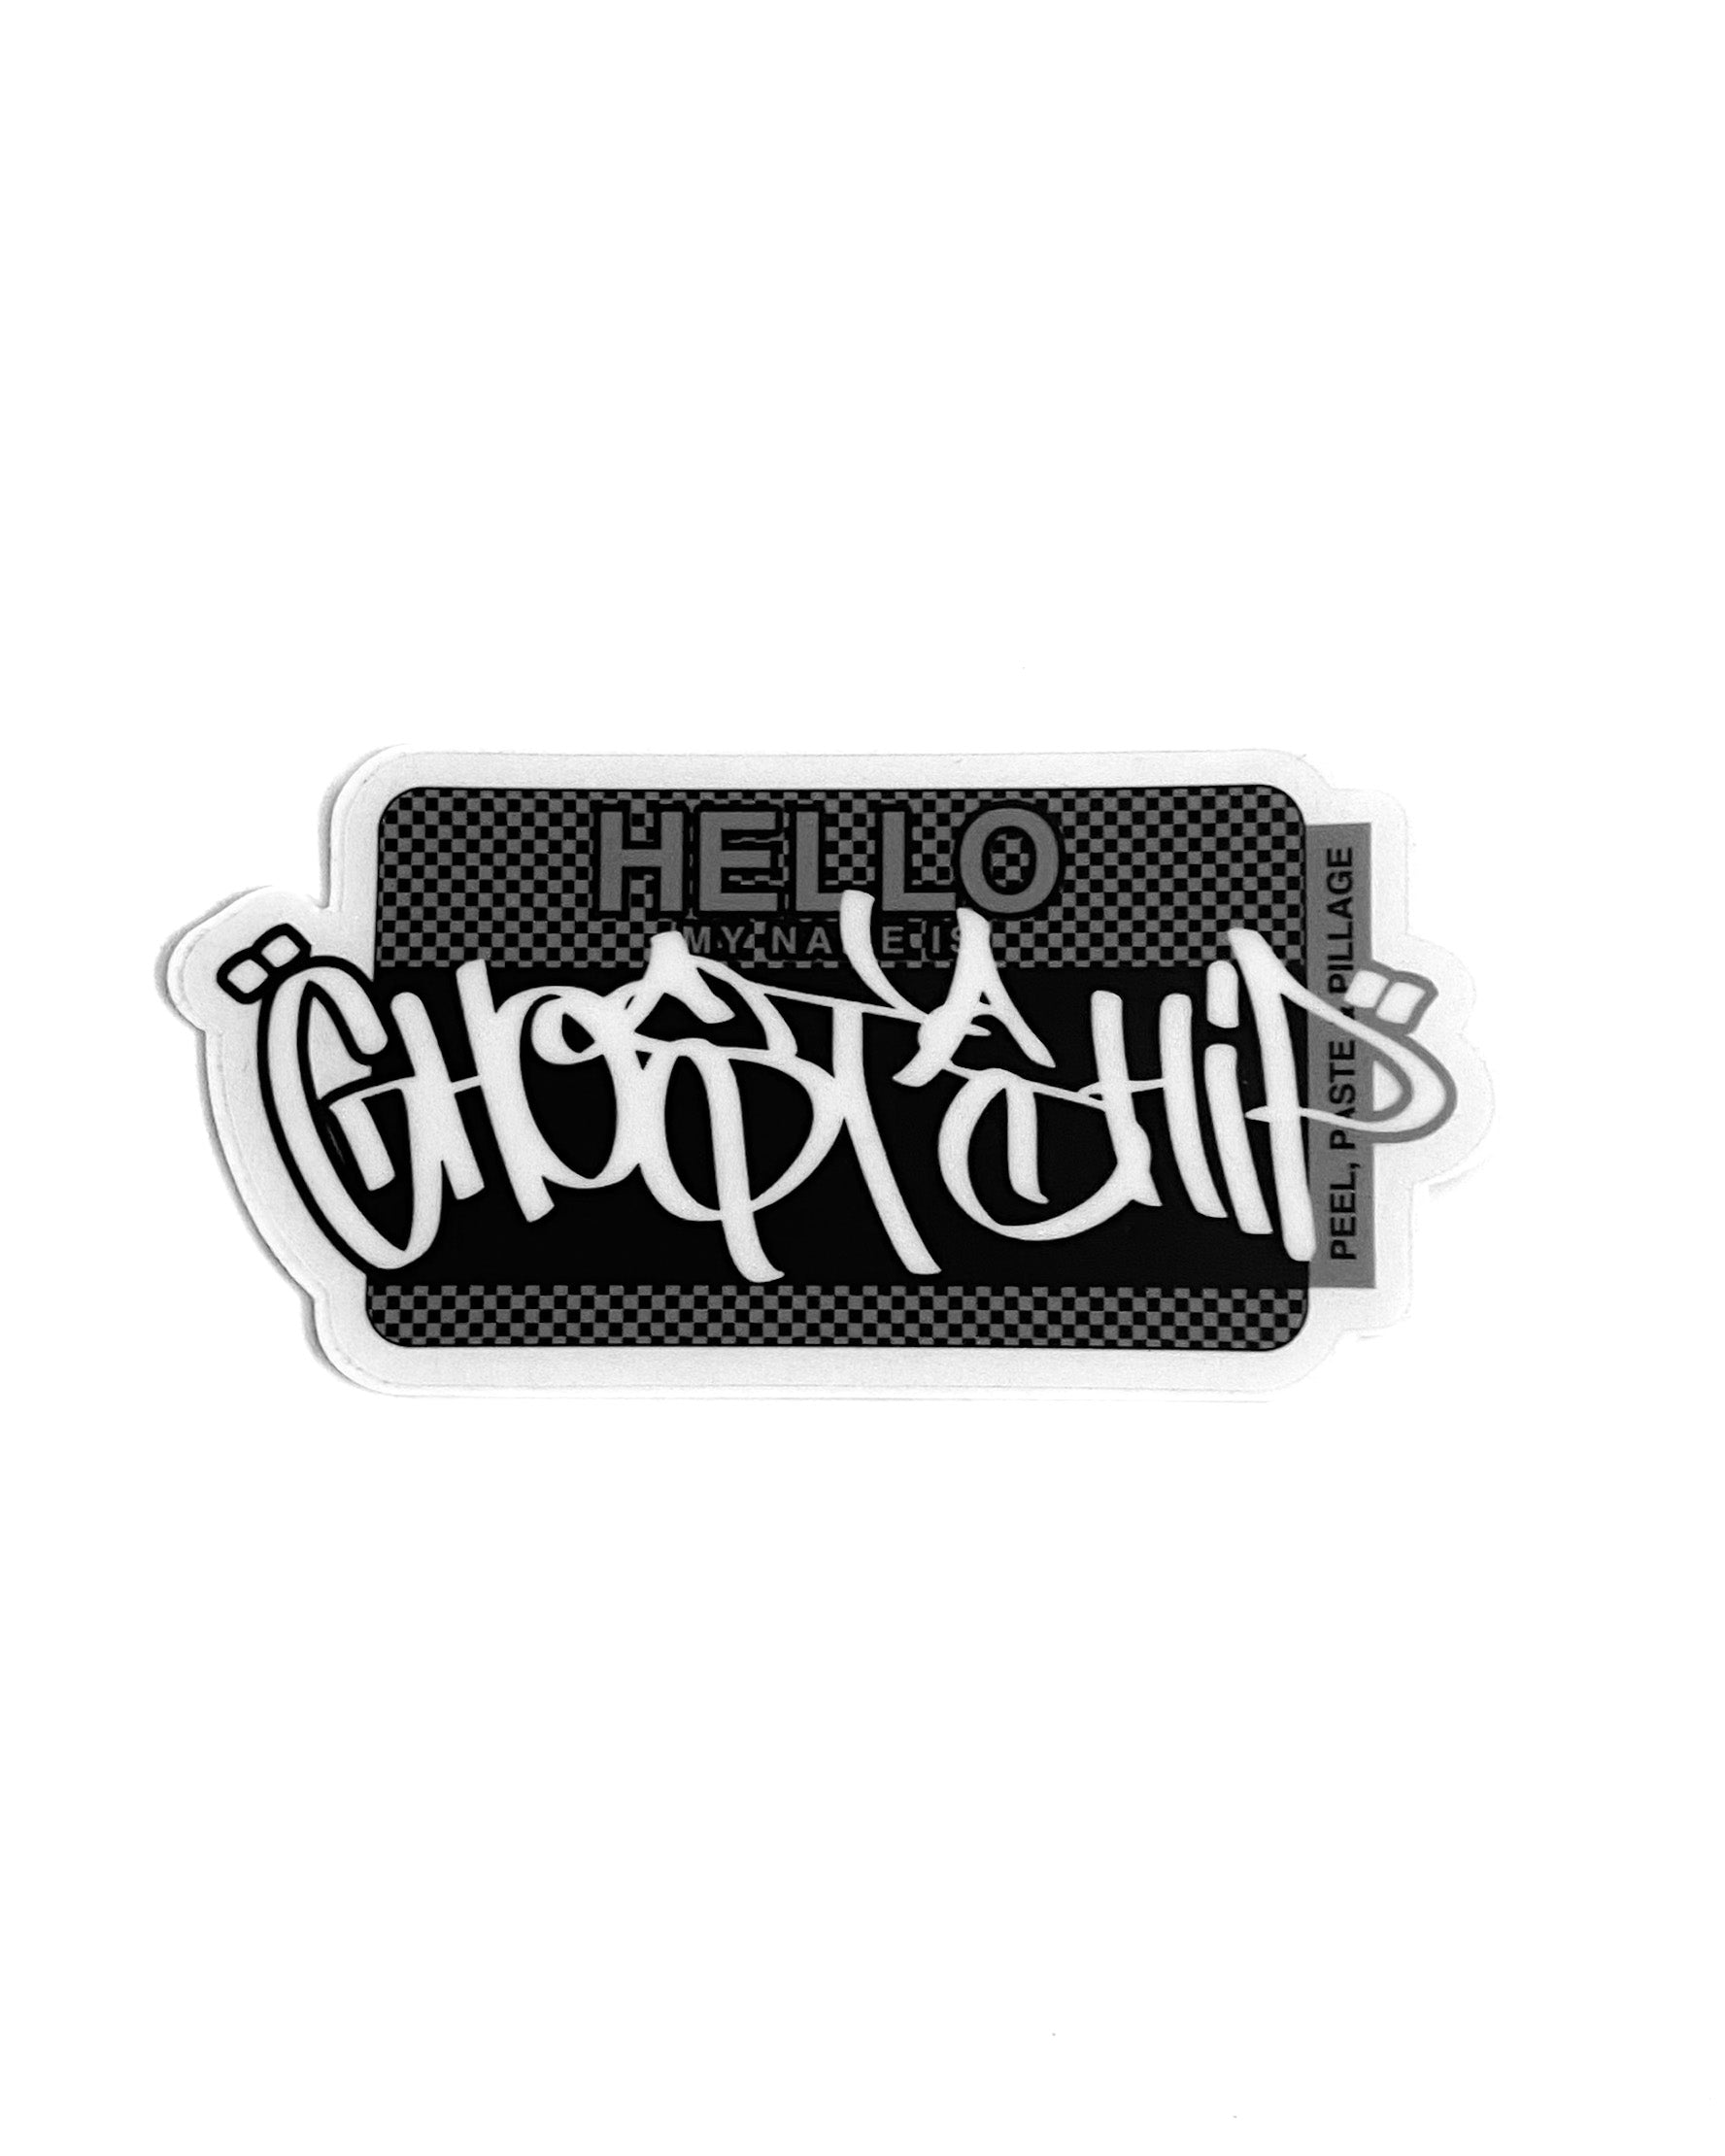 Hello My Name Is... Inverted Black and White Checkered Tag Sticker - GHOSTSHIP.Supply